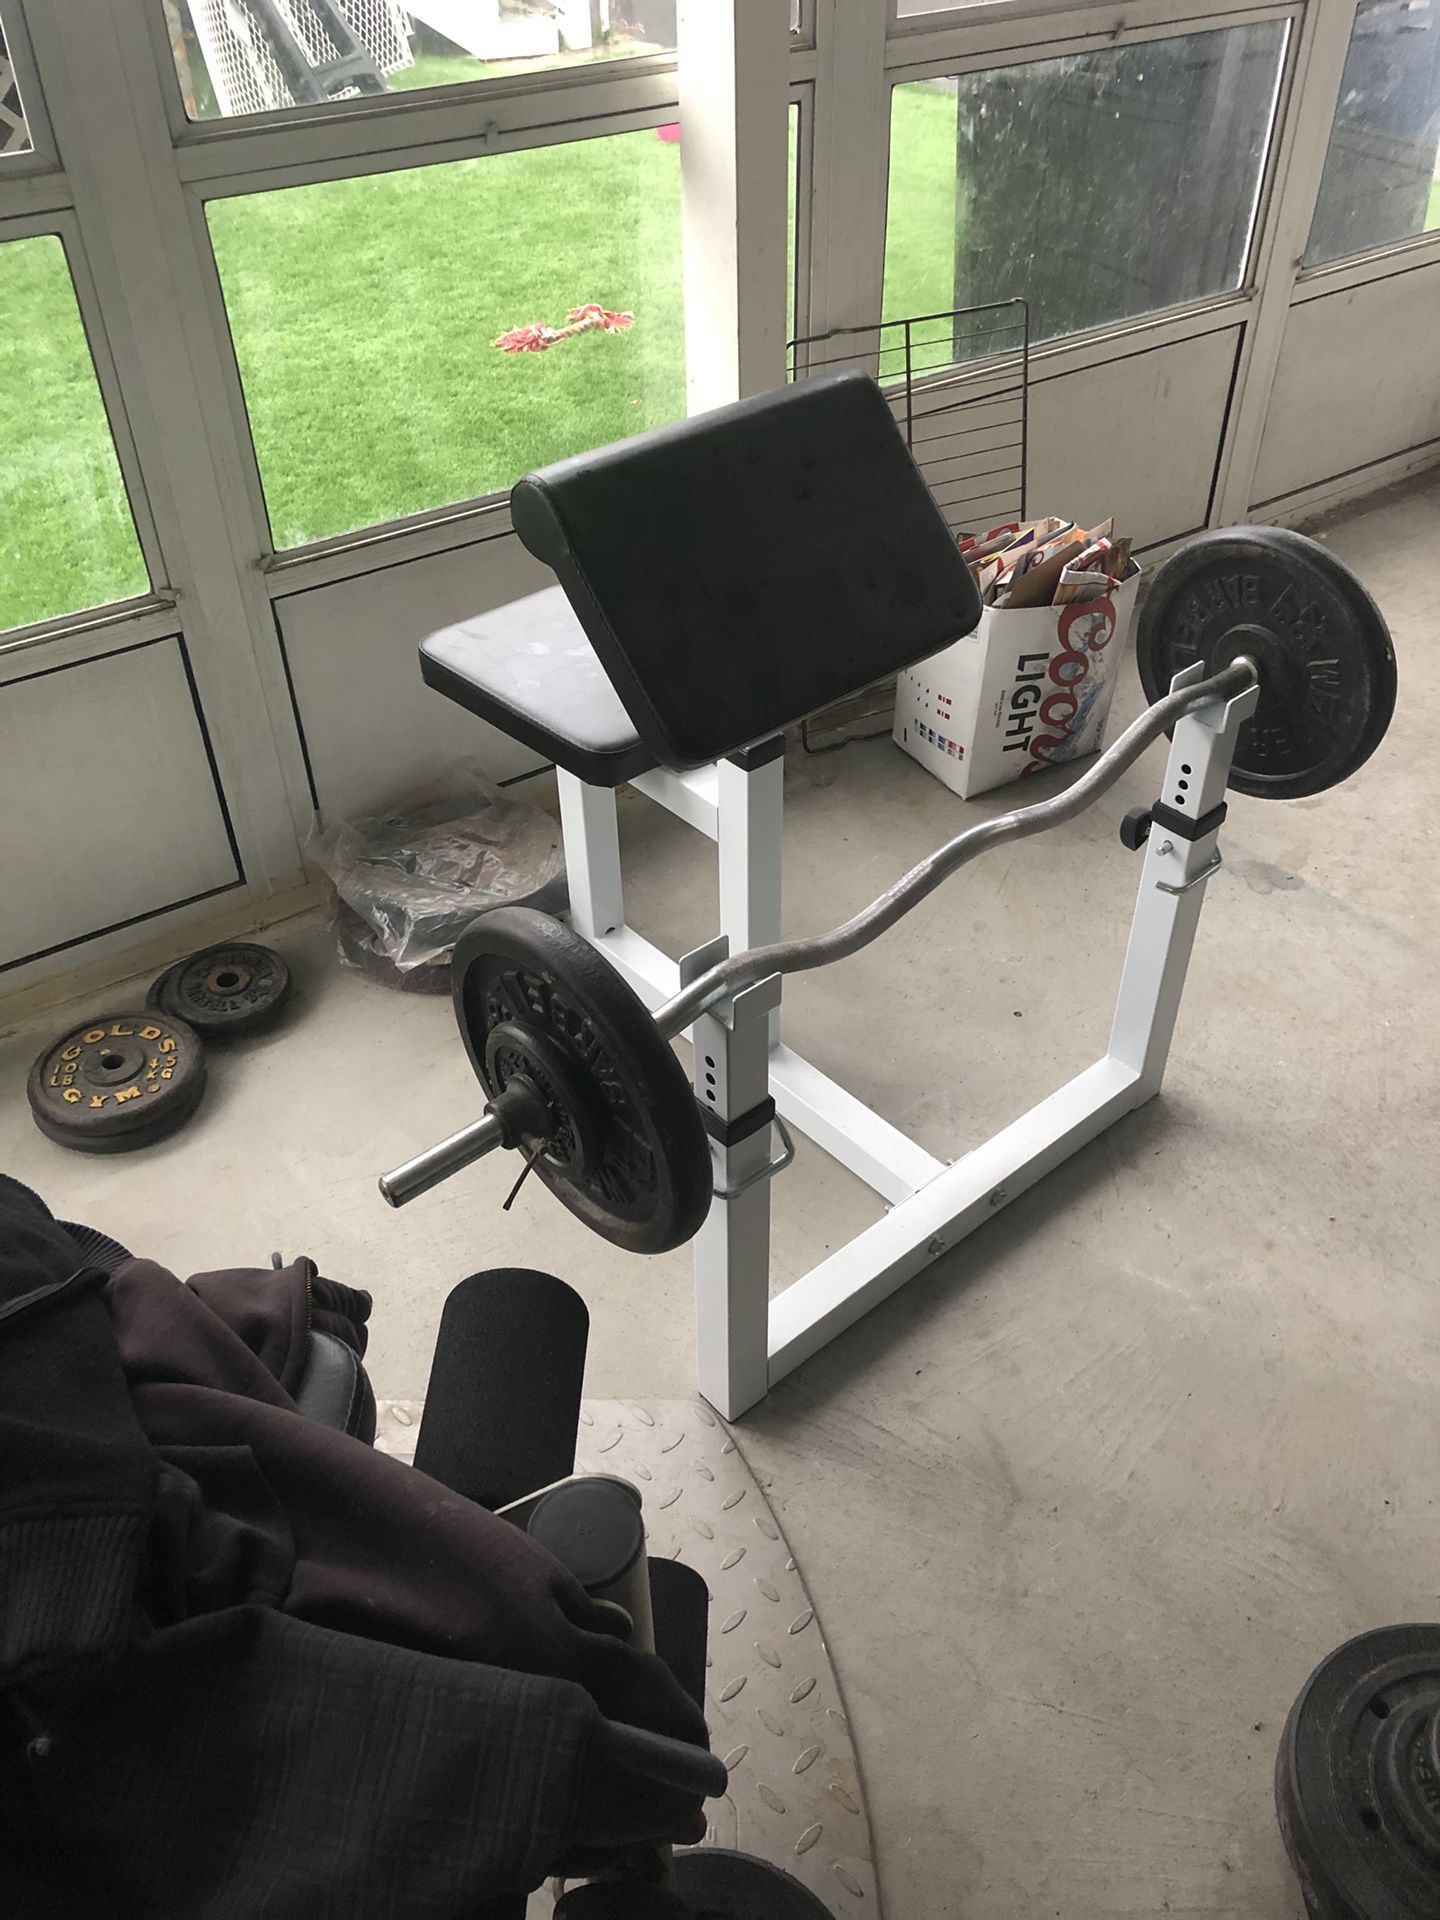 Brand new Curl bench with curl bar and up to 100lb weight included